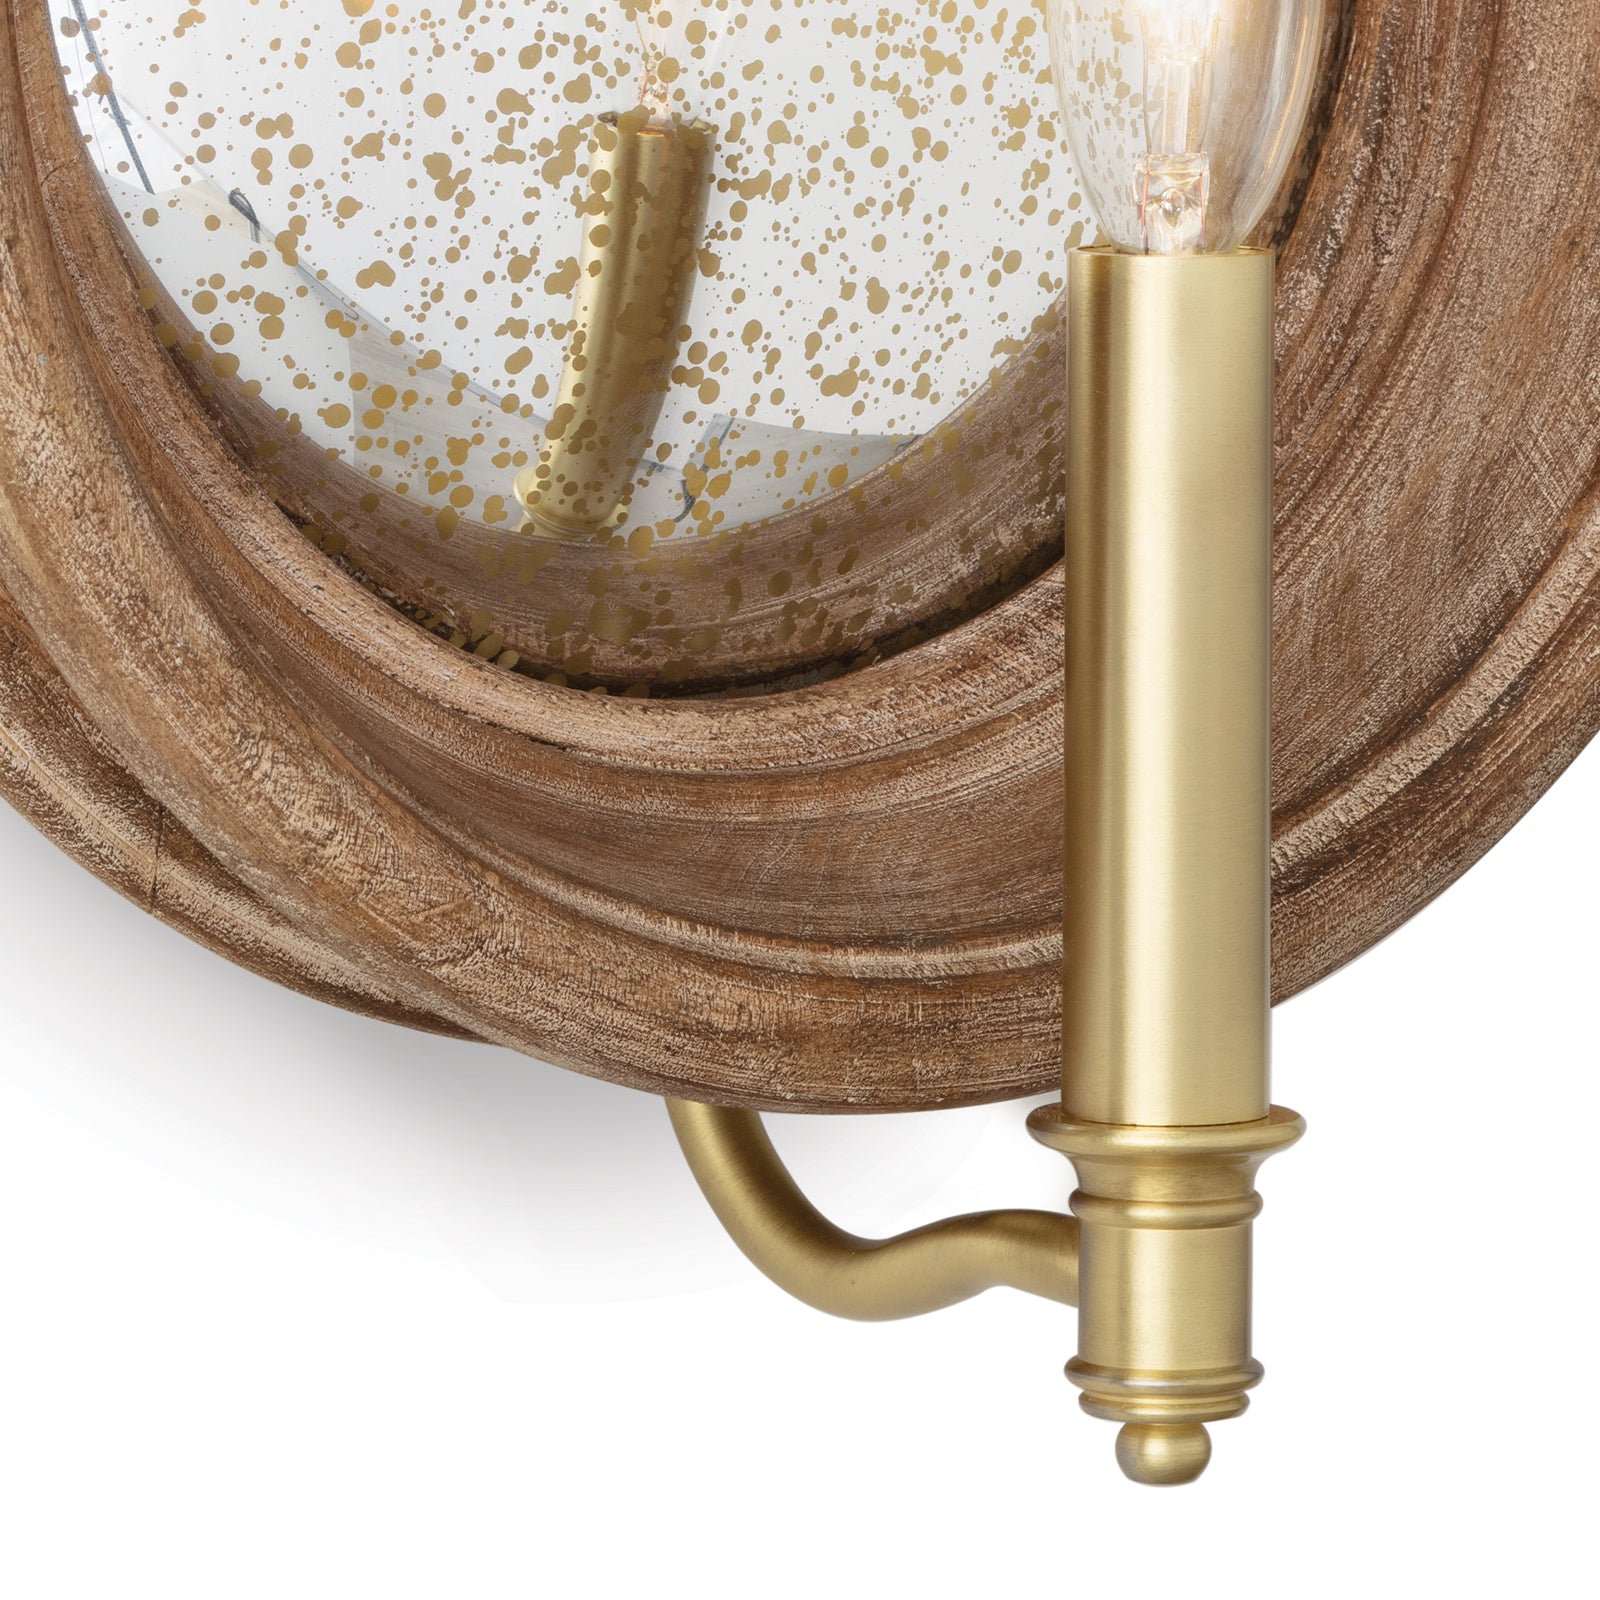 Boundary Wood Sconce in Natural by Southern Living